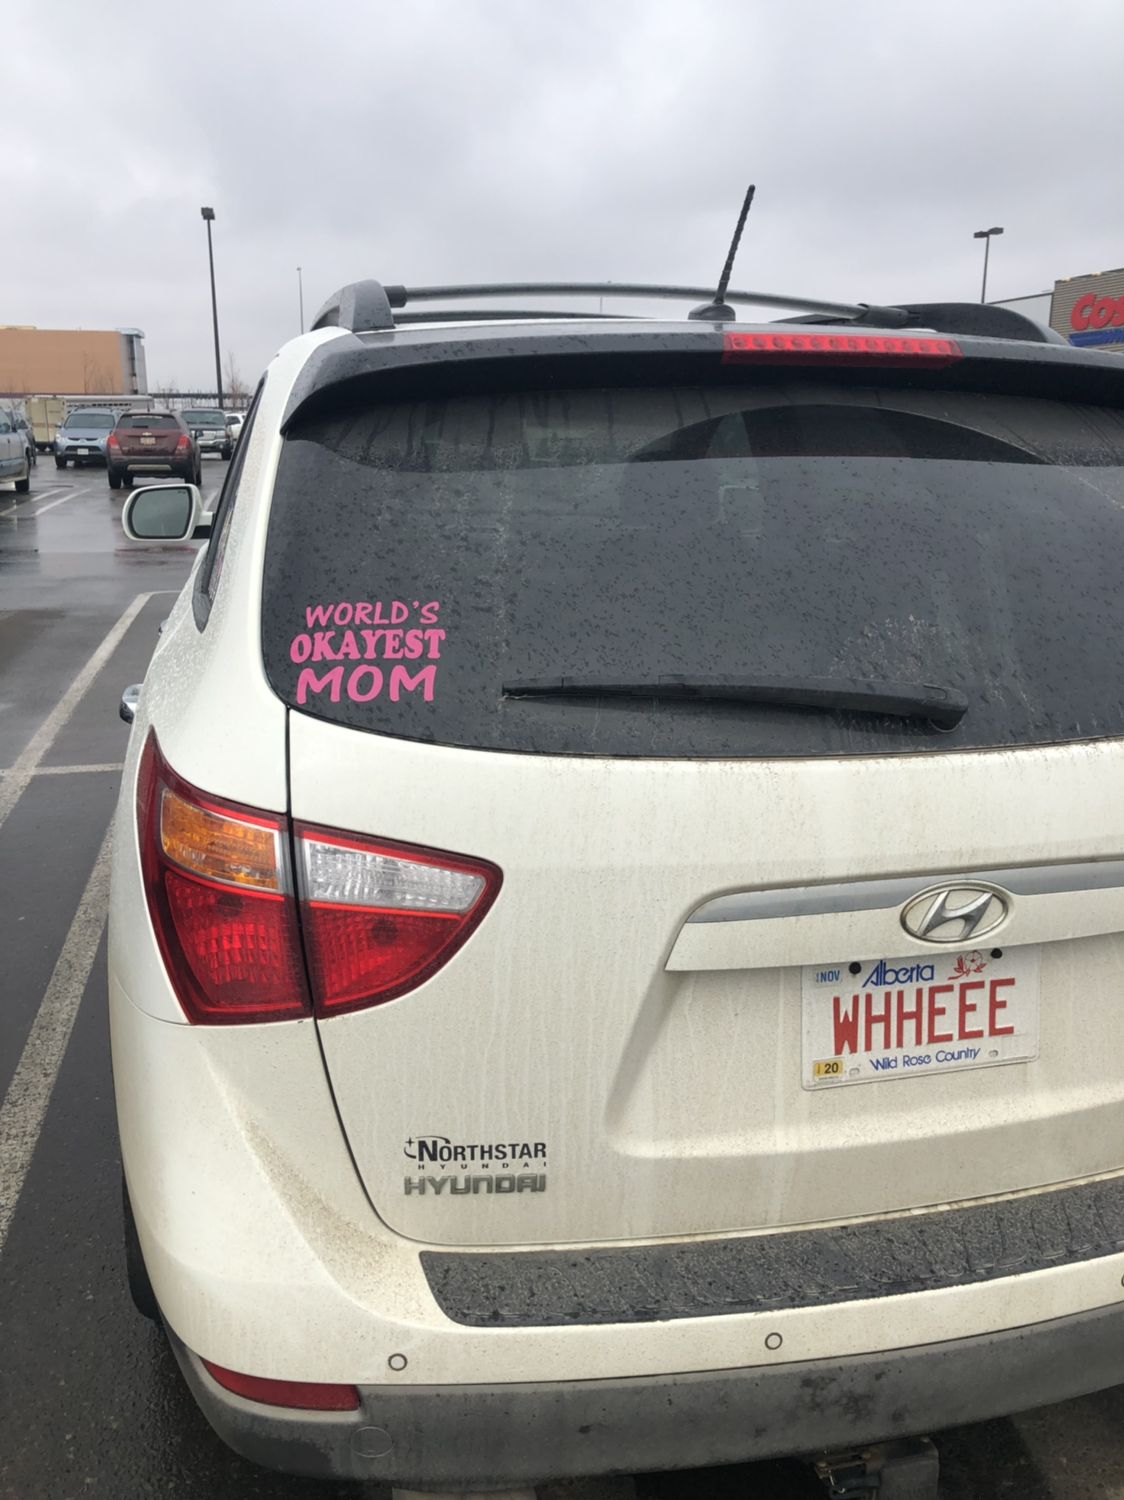 I spotted this beauty of a window sticker today